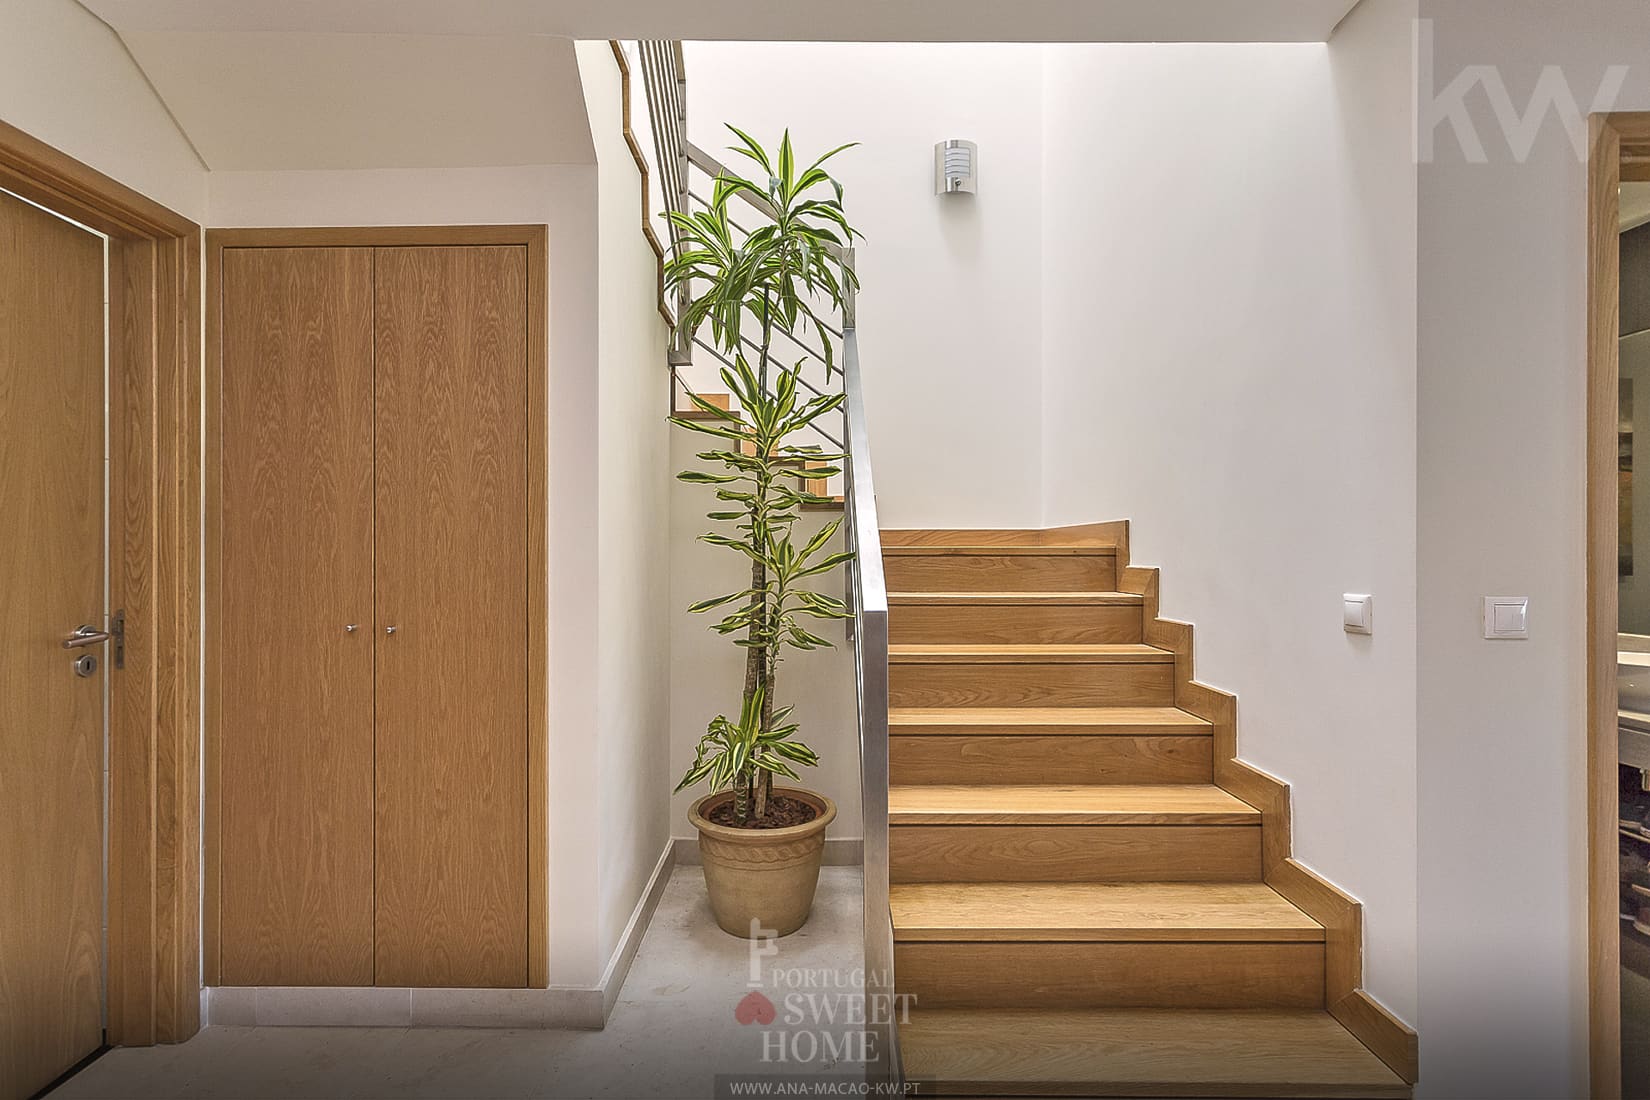 Access staircase to the 2nd floor with 7 meters of ceiling height